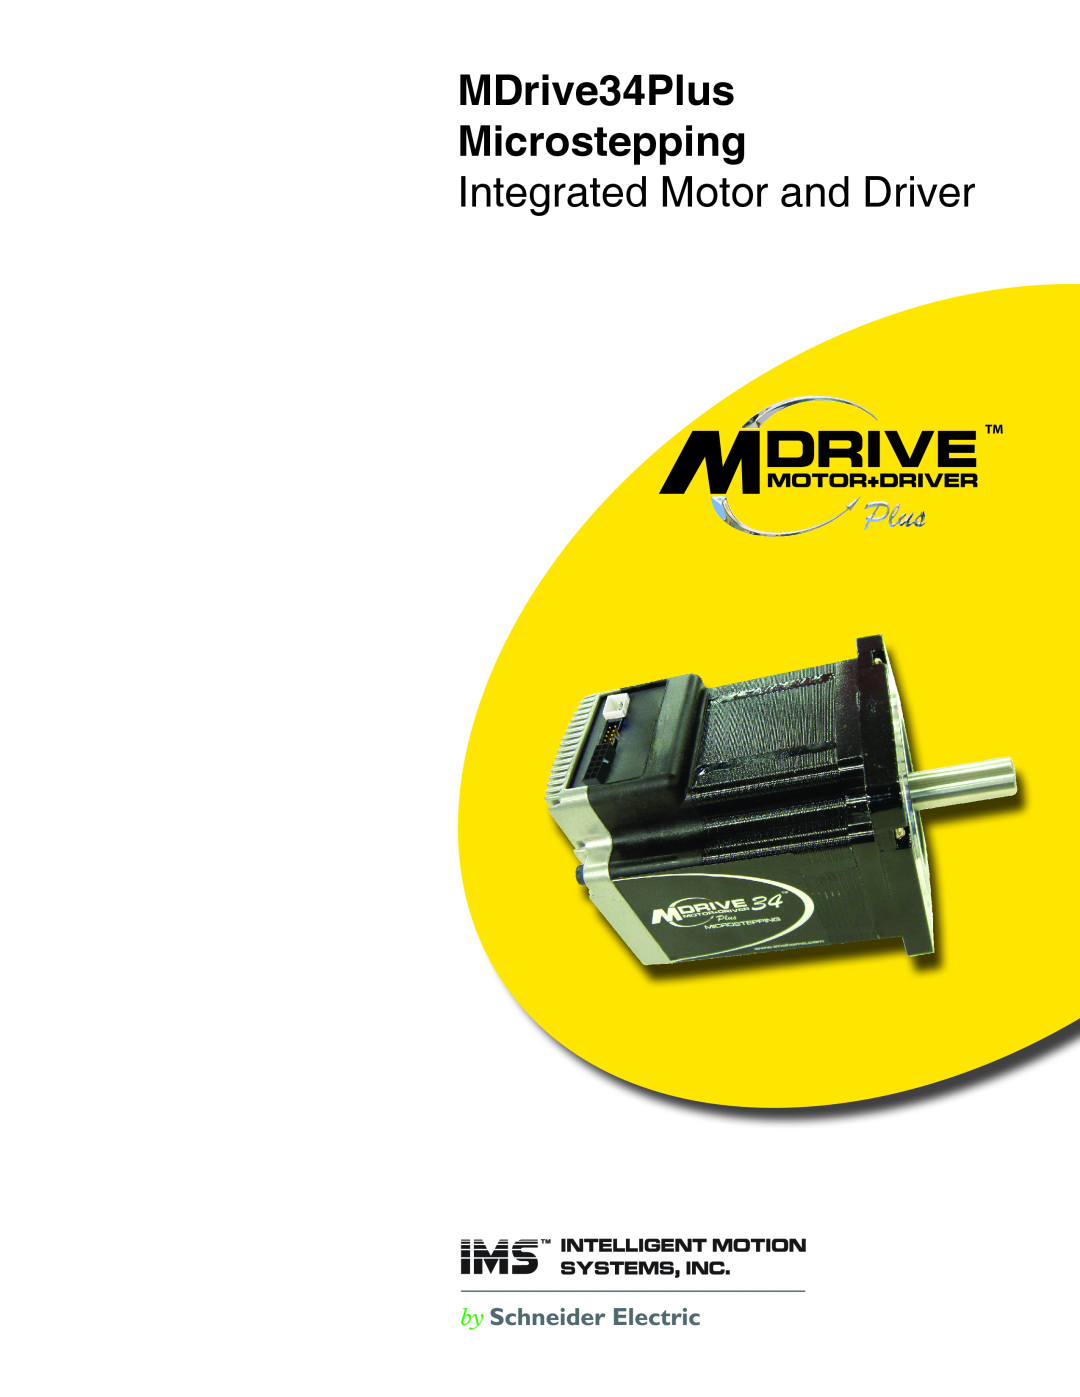 Intelligent Motion Systems manual MDrive34Plus Microstepping, Integrated Motor and Driver 